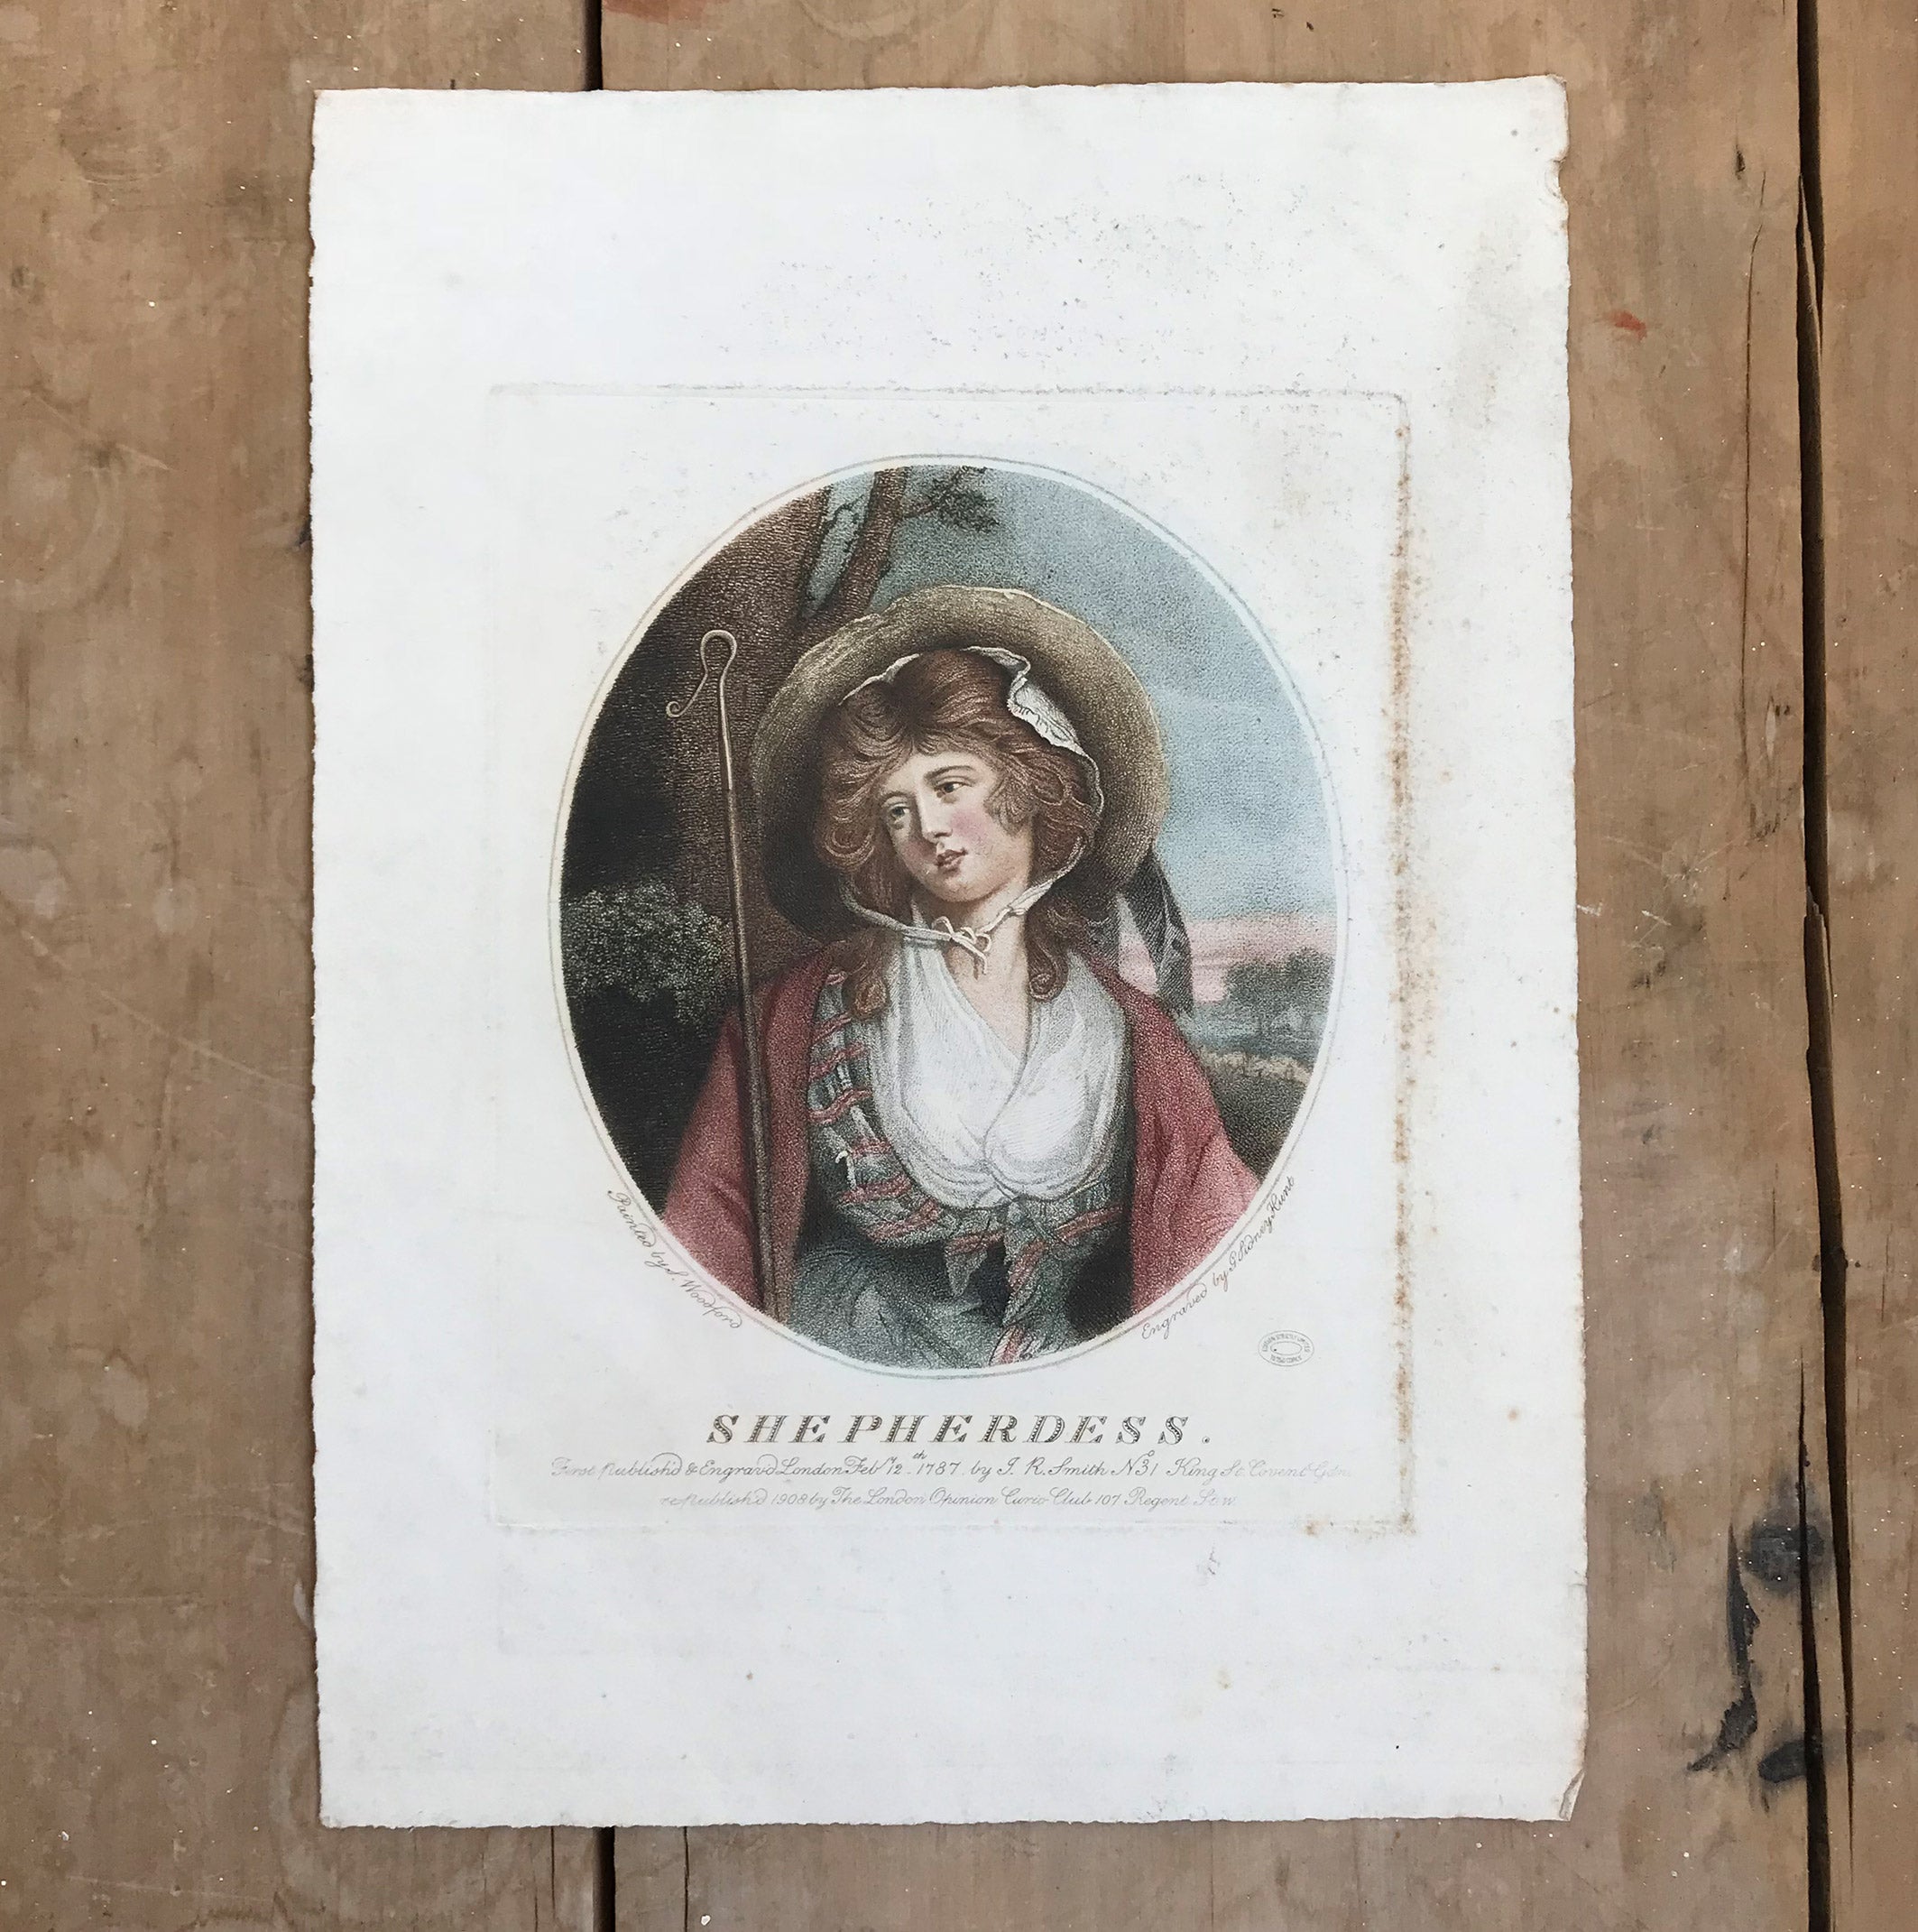 Period Print of a  Shepherdess dated 1908 by Sidney Hunt. Limited to 250 prints. Find Antique Etchings & other Antique Prints at IntoVintage.co.uk